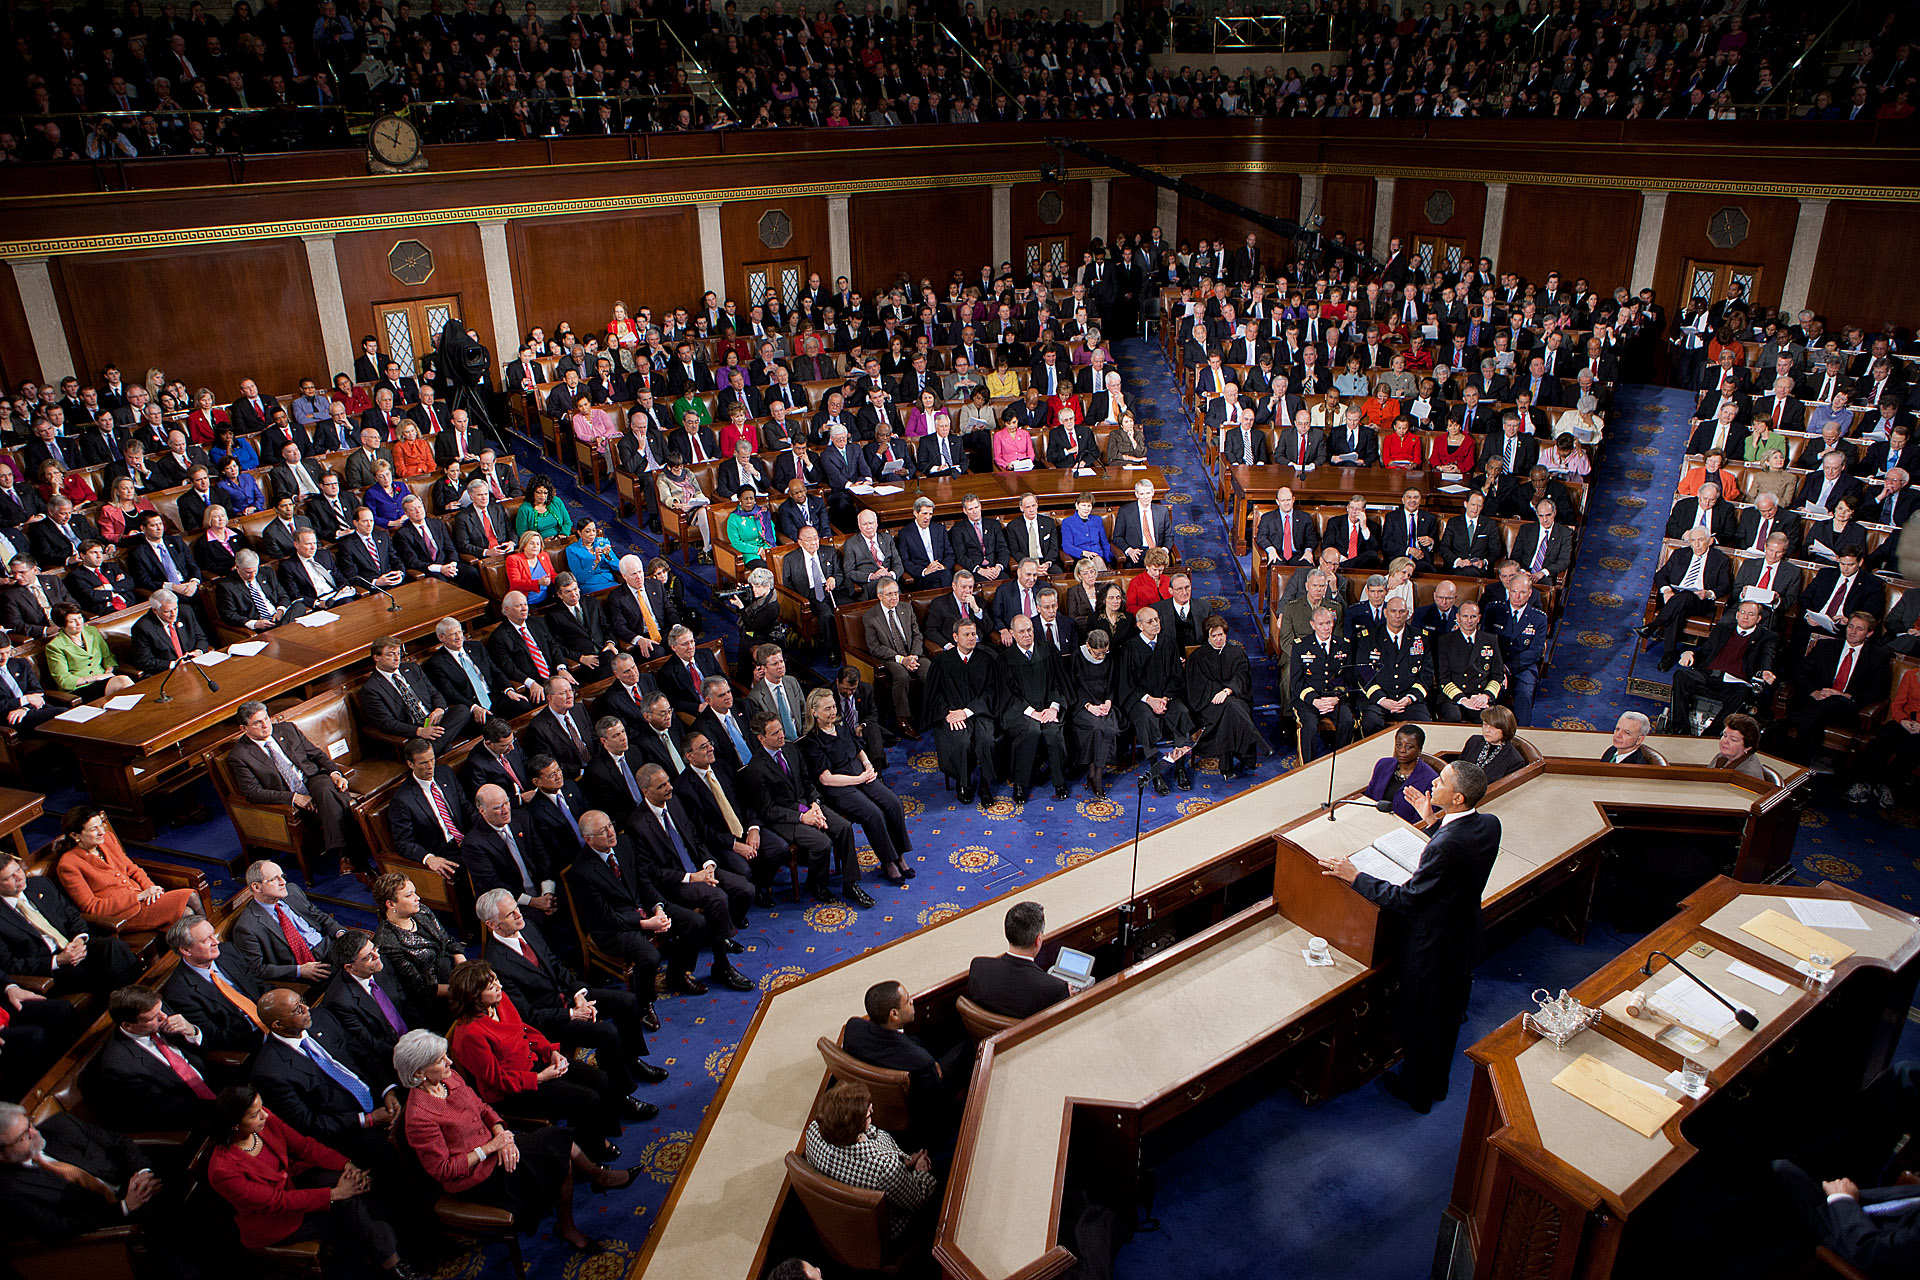 President Barack Obama Delivers The State Of The Union Address